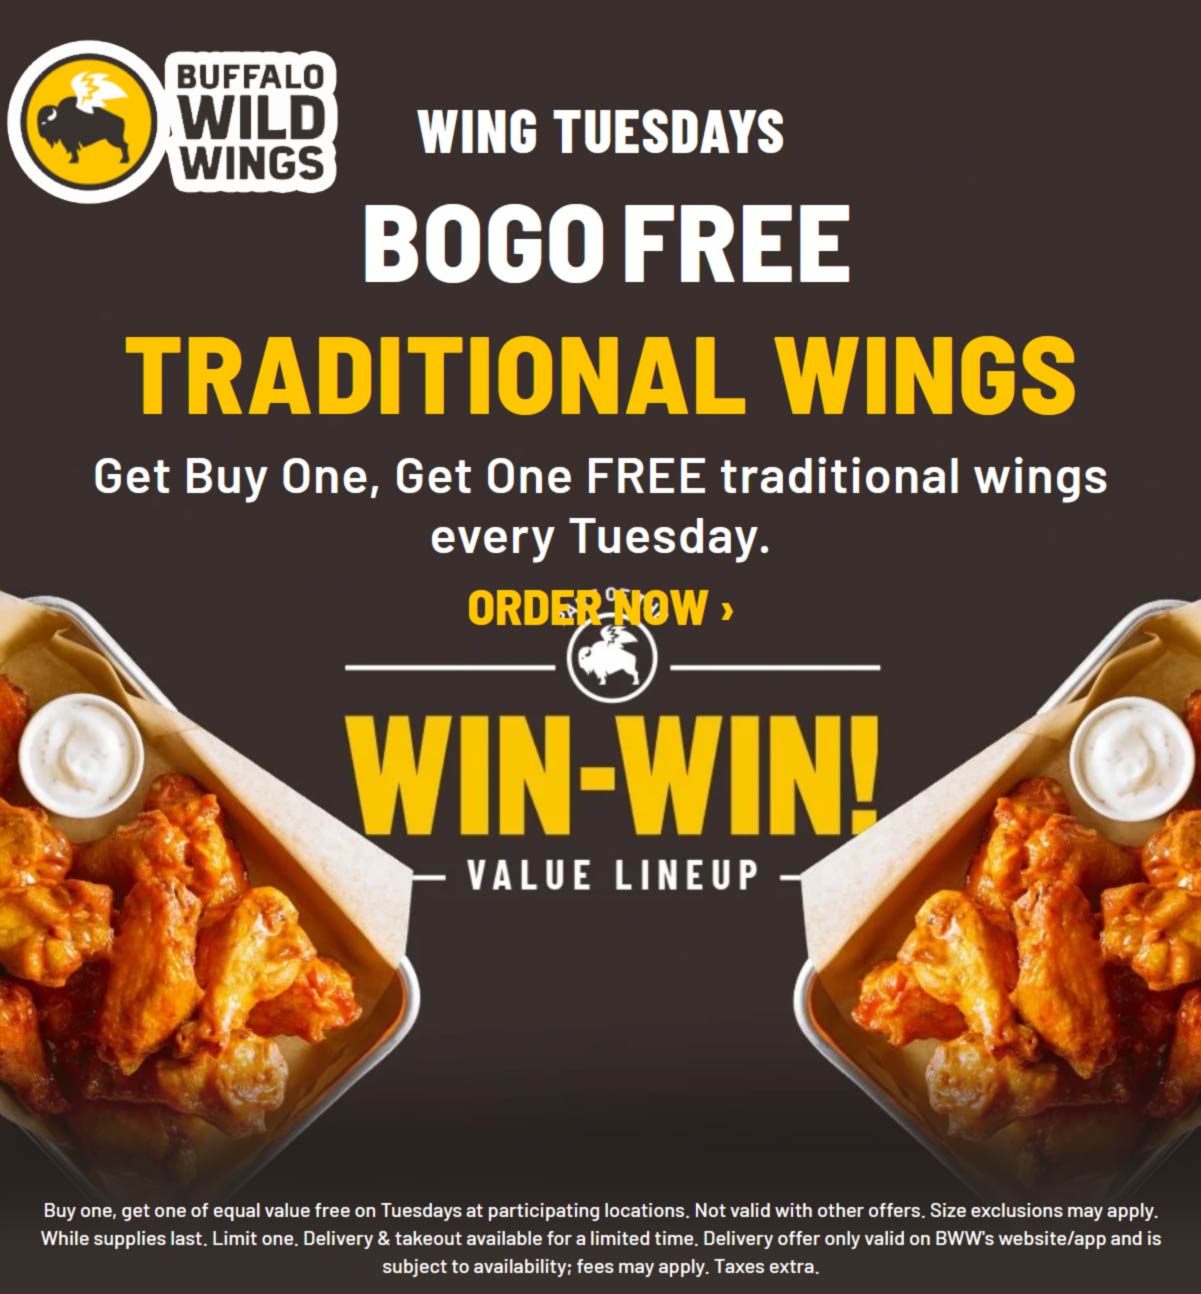 Buffalo Wild Wings restaurants Coupon  Second traditional chicken wings free today at Buffalo Wild Wings #buffalowildwings 